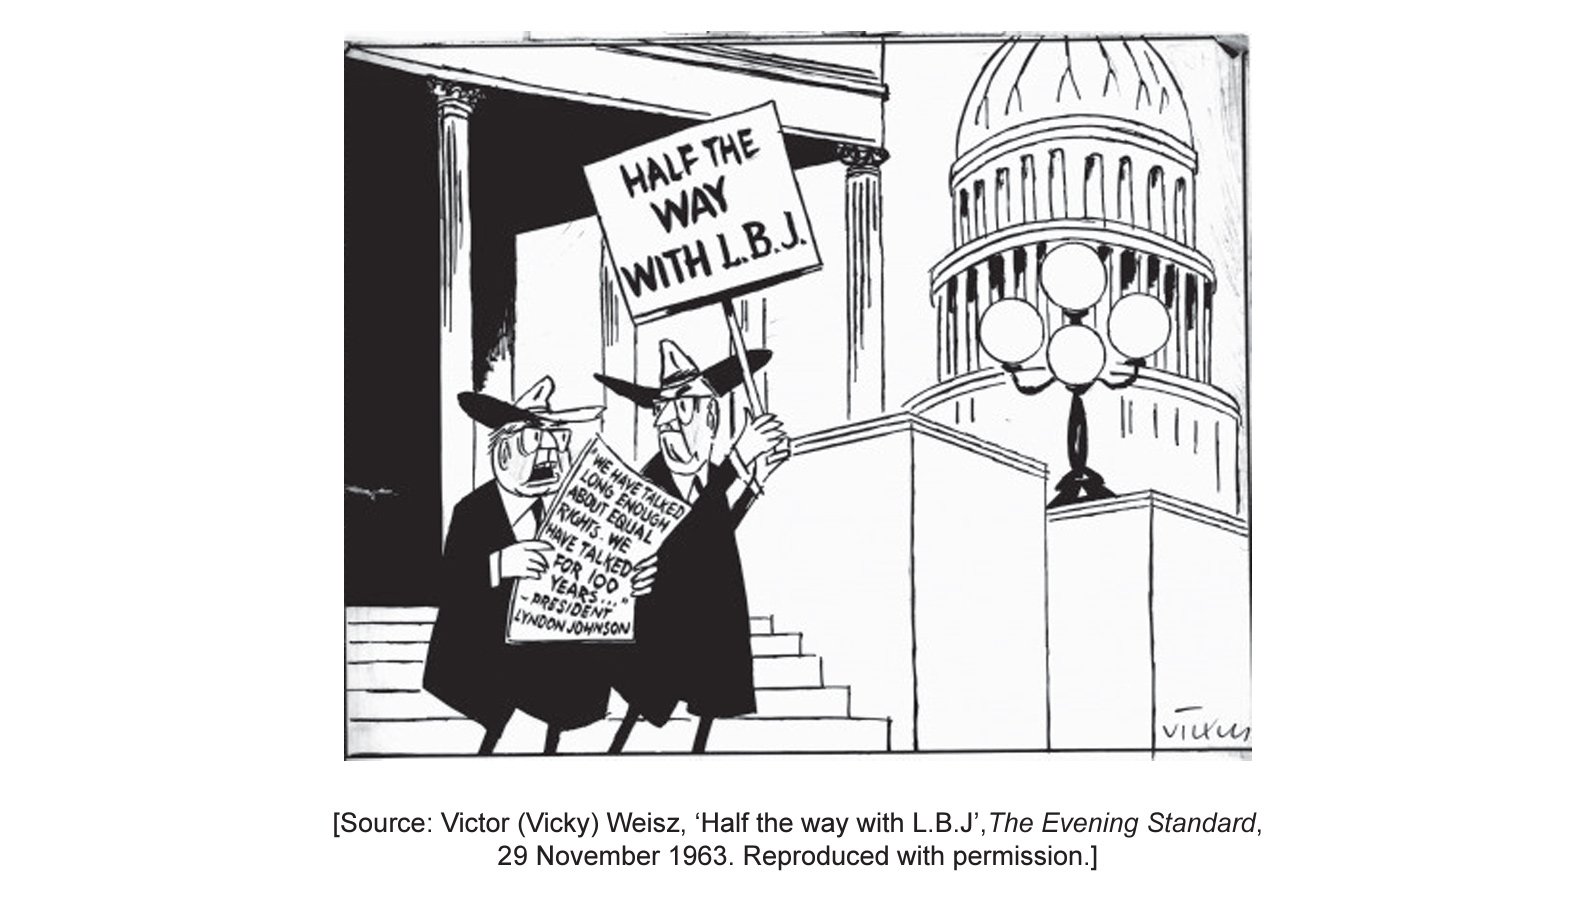 Victor (Vicky) Weisz, a political cartoonist, depicts two senators outside the US Congress responding to the civil rights programme of President Lyndon B Johnson [LBJ] in the cartoon "Now, we mustn't let him rush us into things!" for the British newspaper the Evening Standard (29 November 1963).